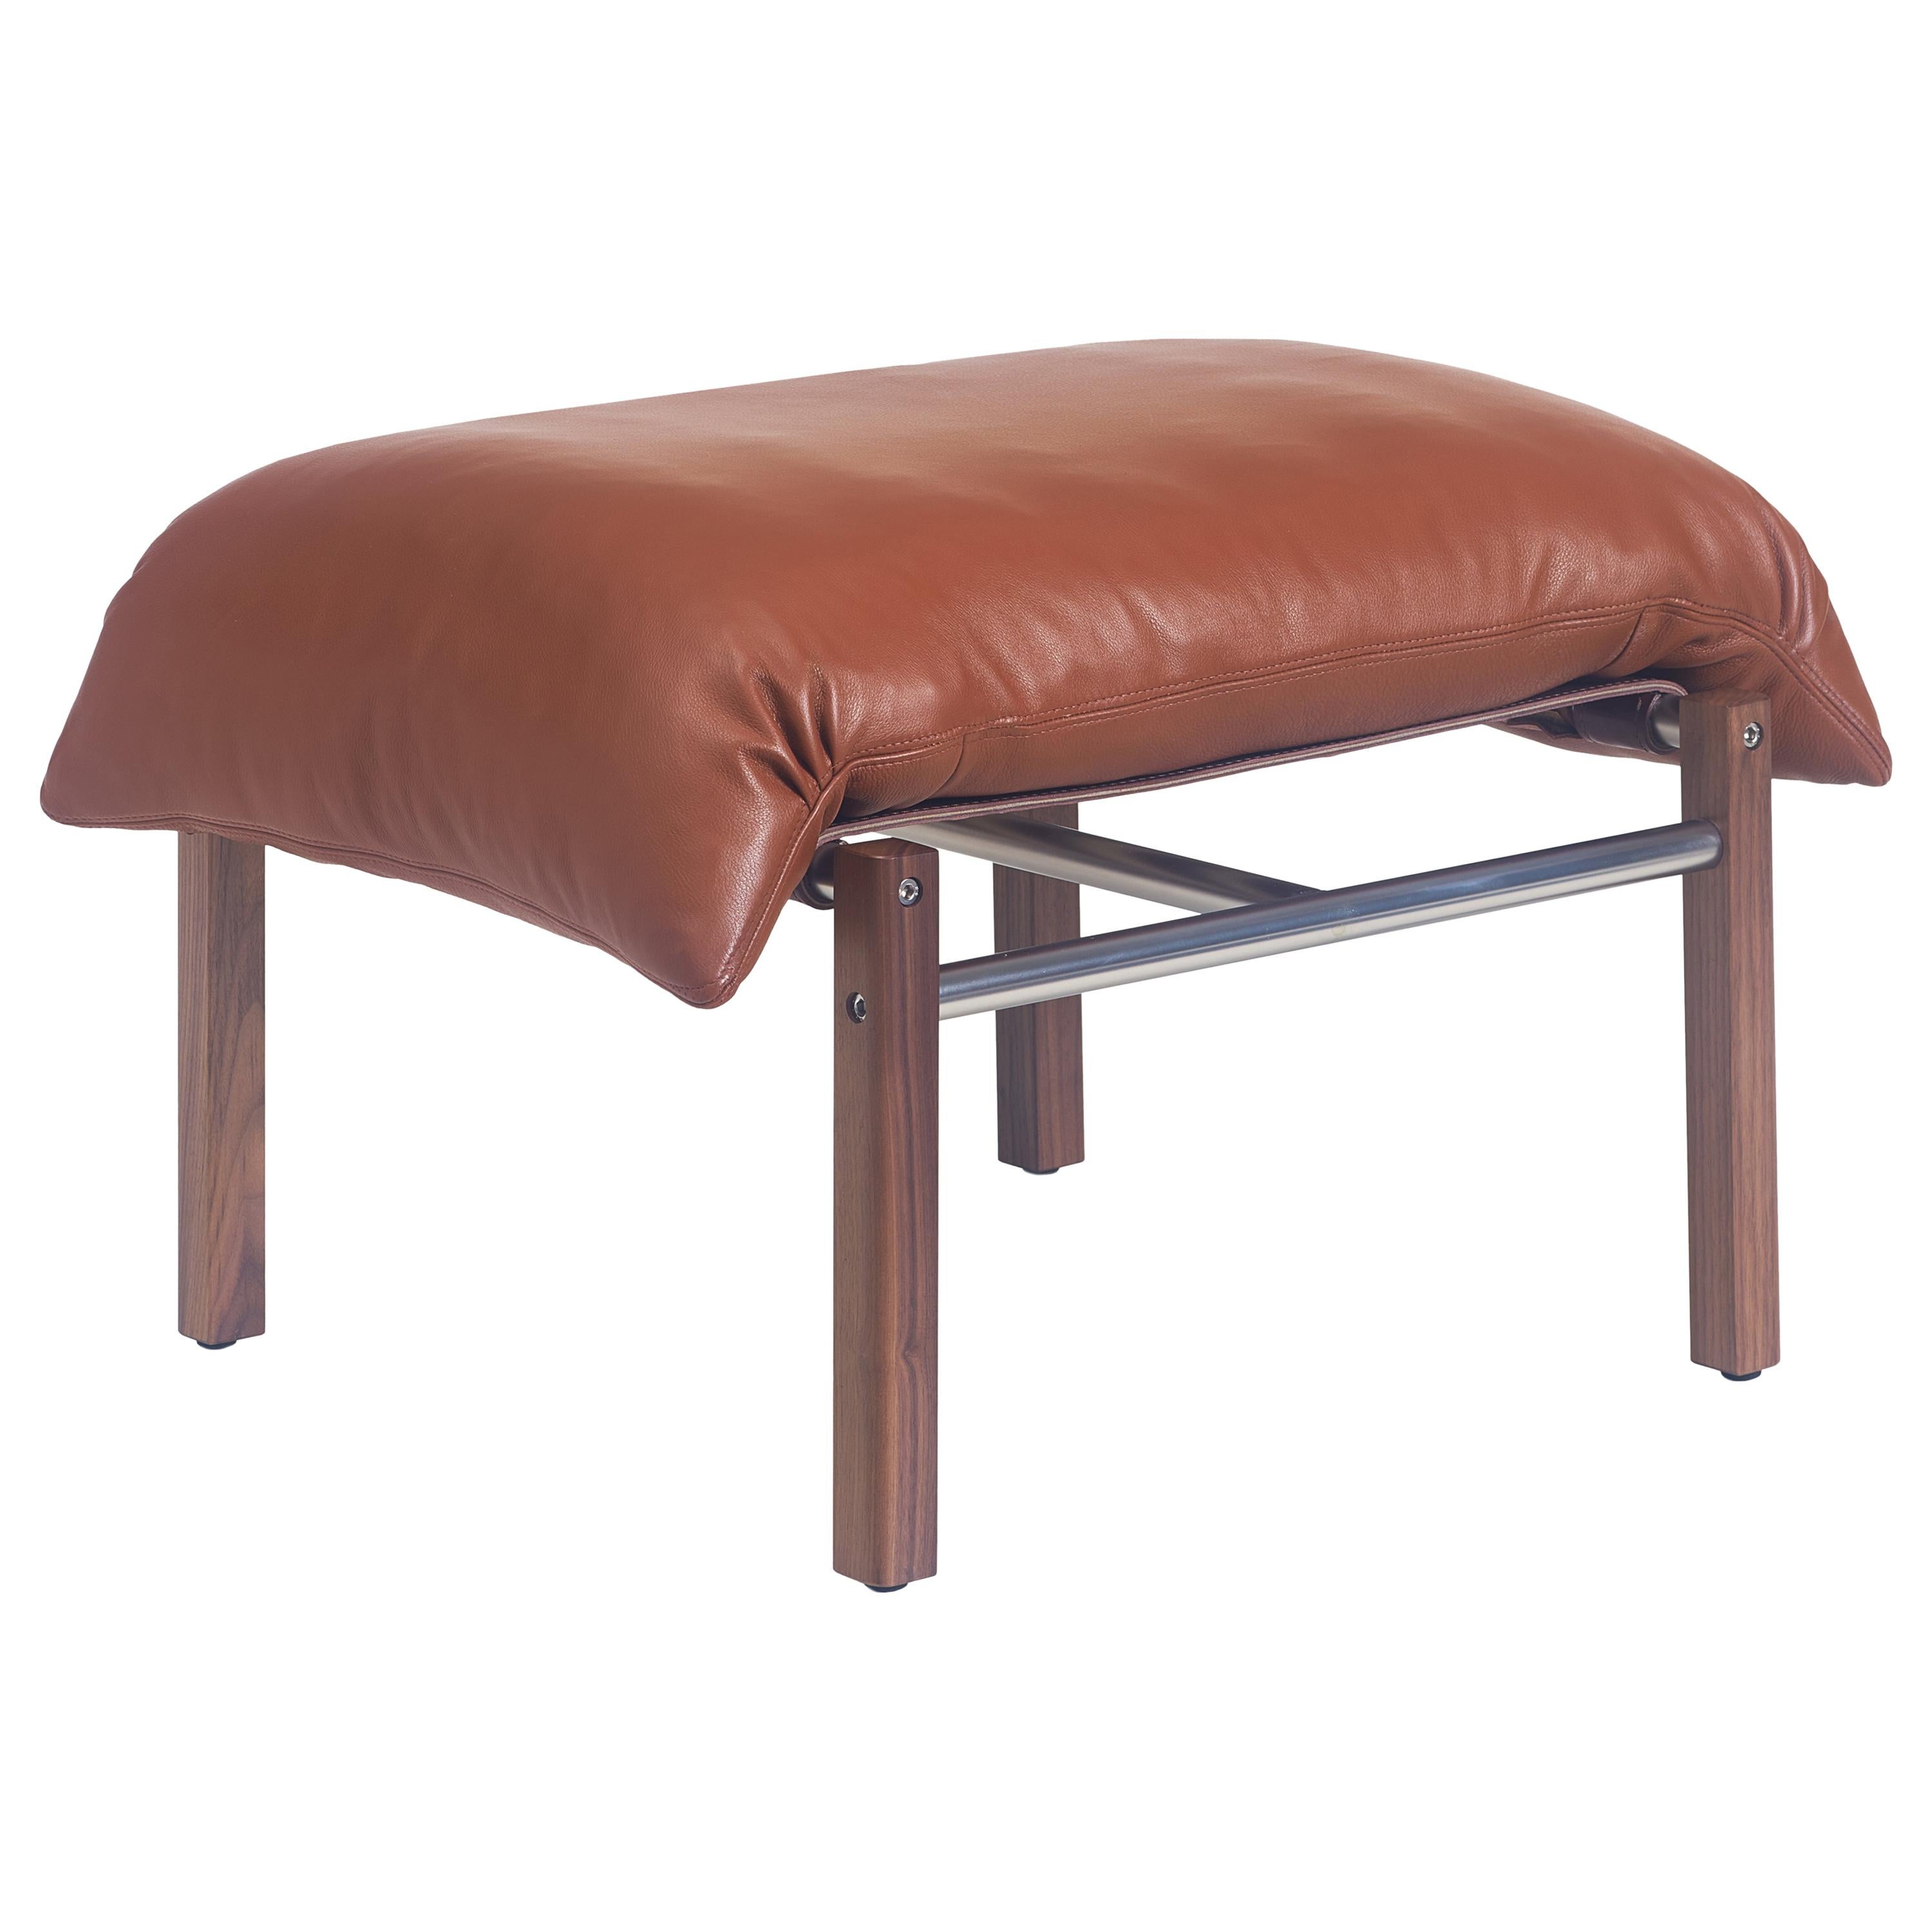 For Sale: Brown (Comfort 33286 Chestnut Brown) Sling Ottoman in Solid Walnut, Satin Nickel and Leather Designed by Craig Bassam